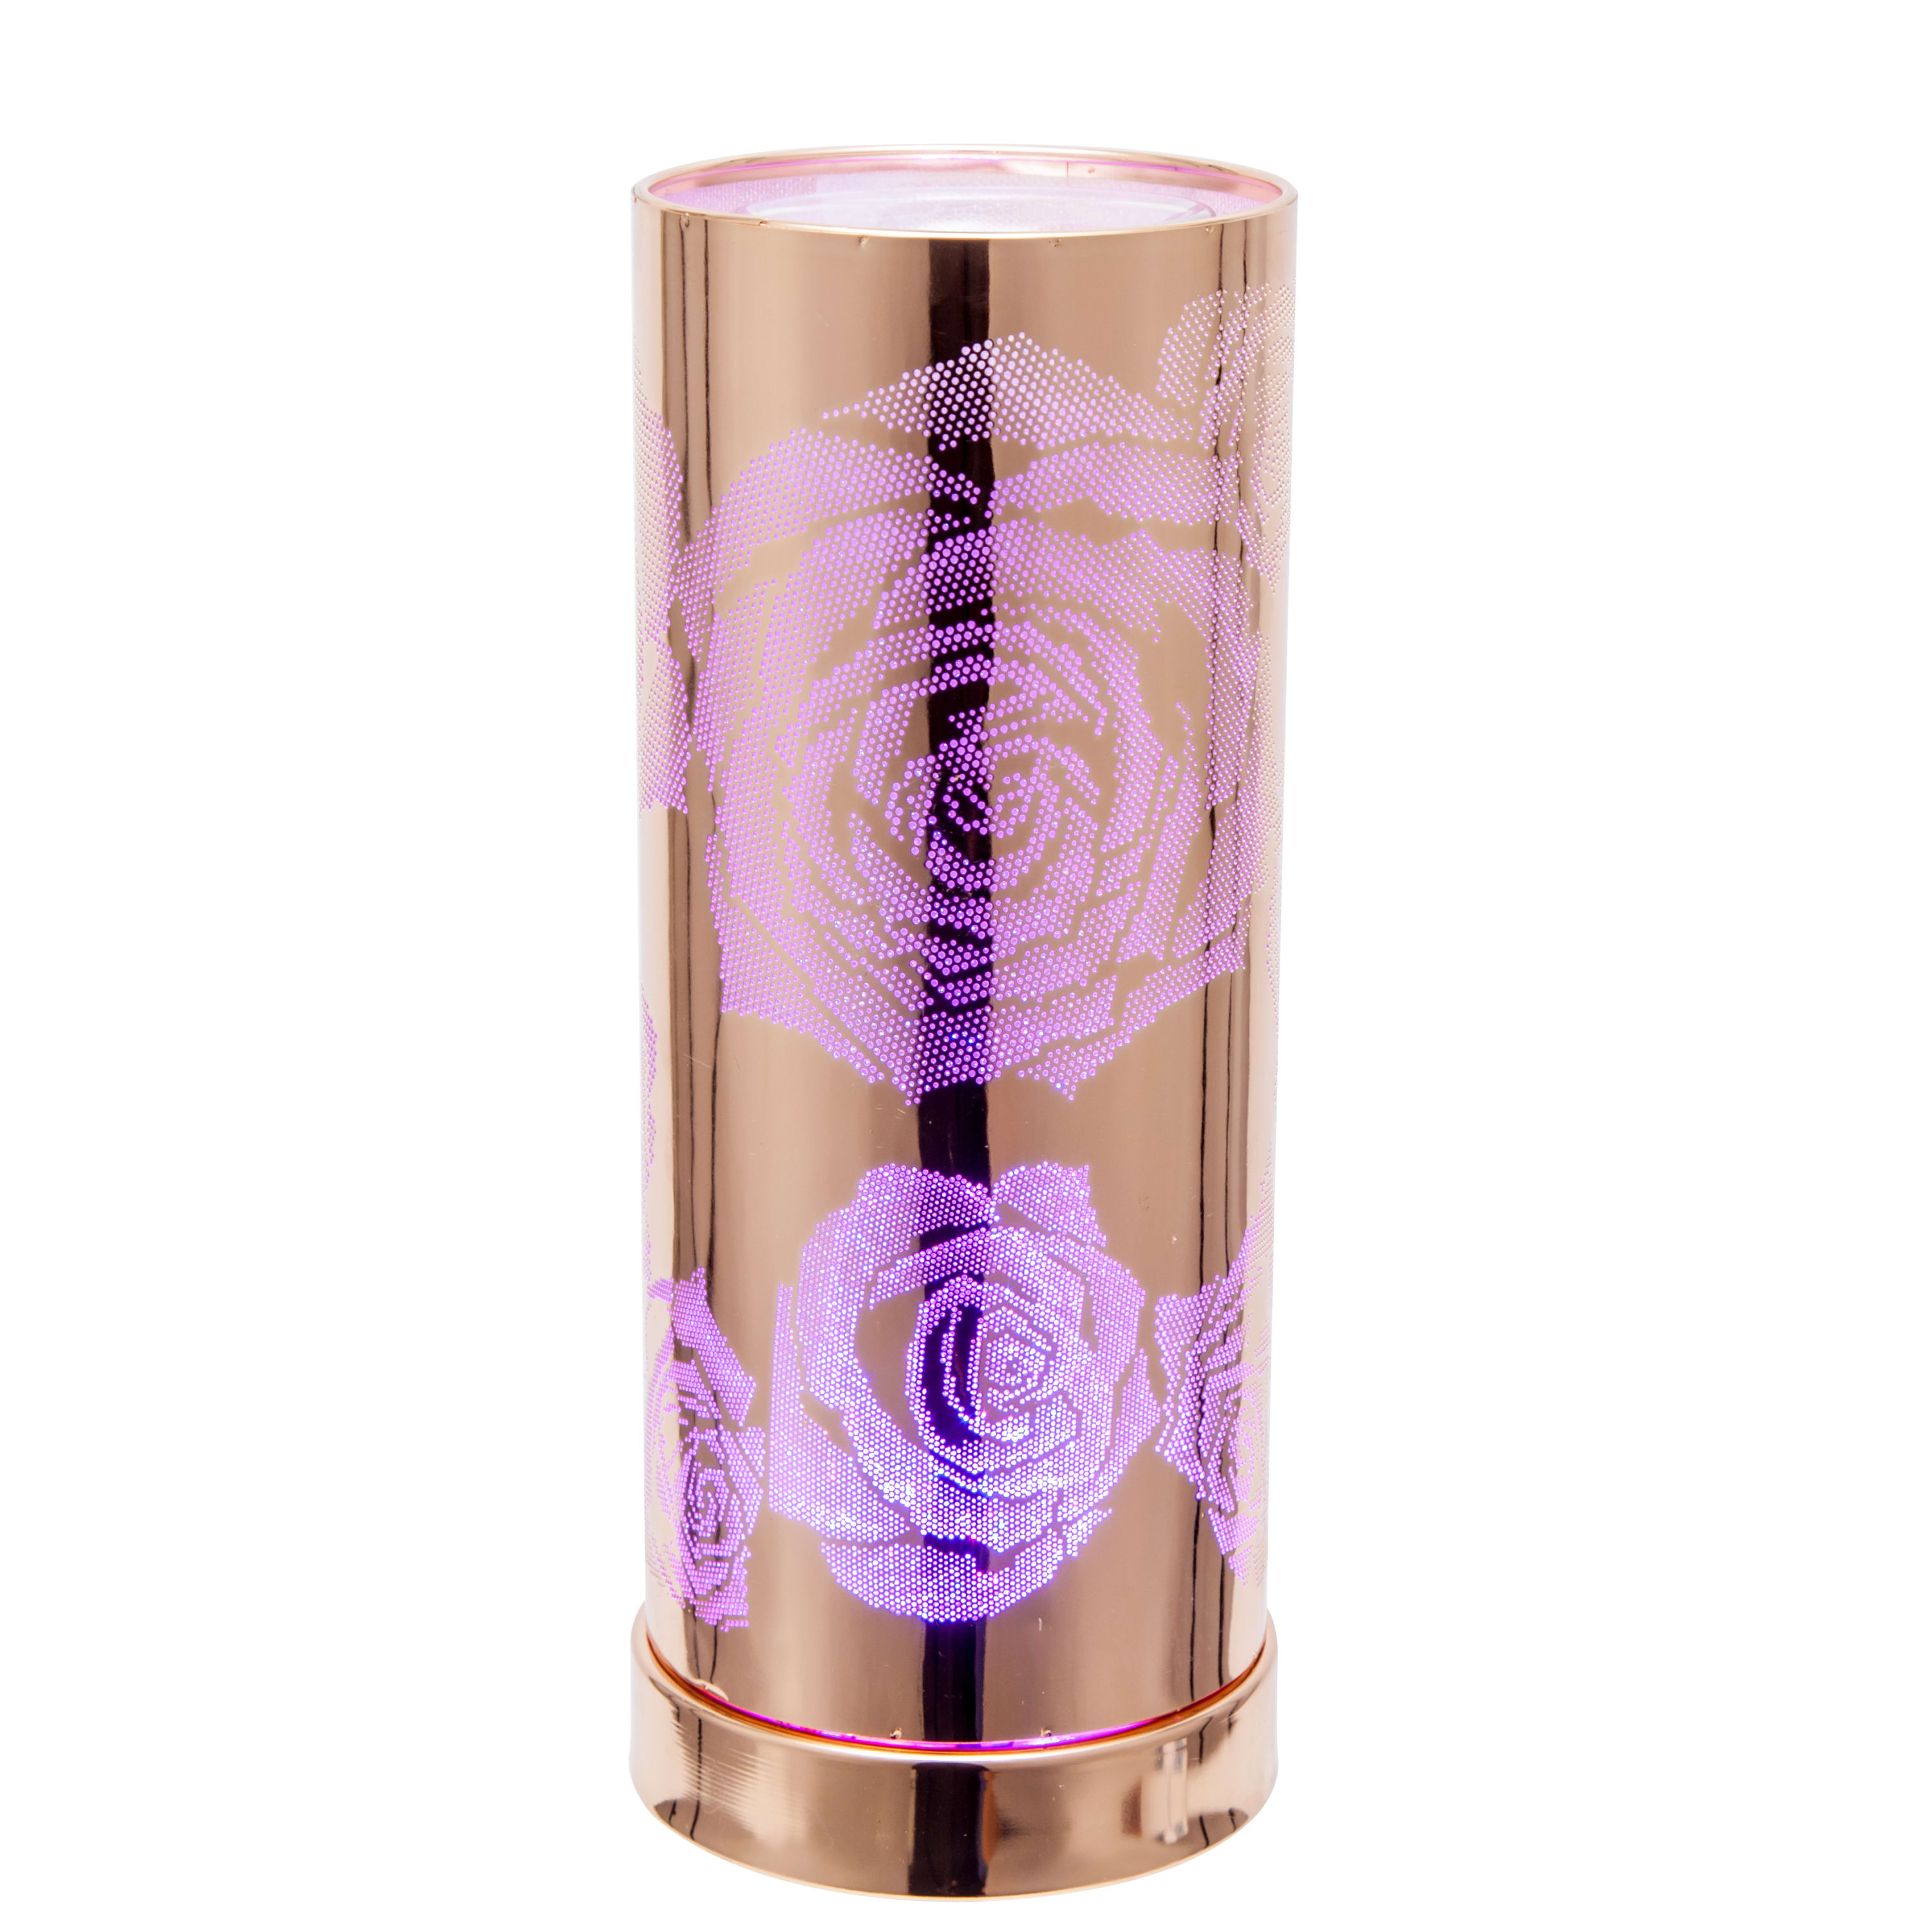 Colour Changing Wax Burner - R. Gold Rose